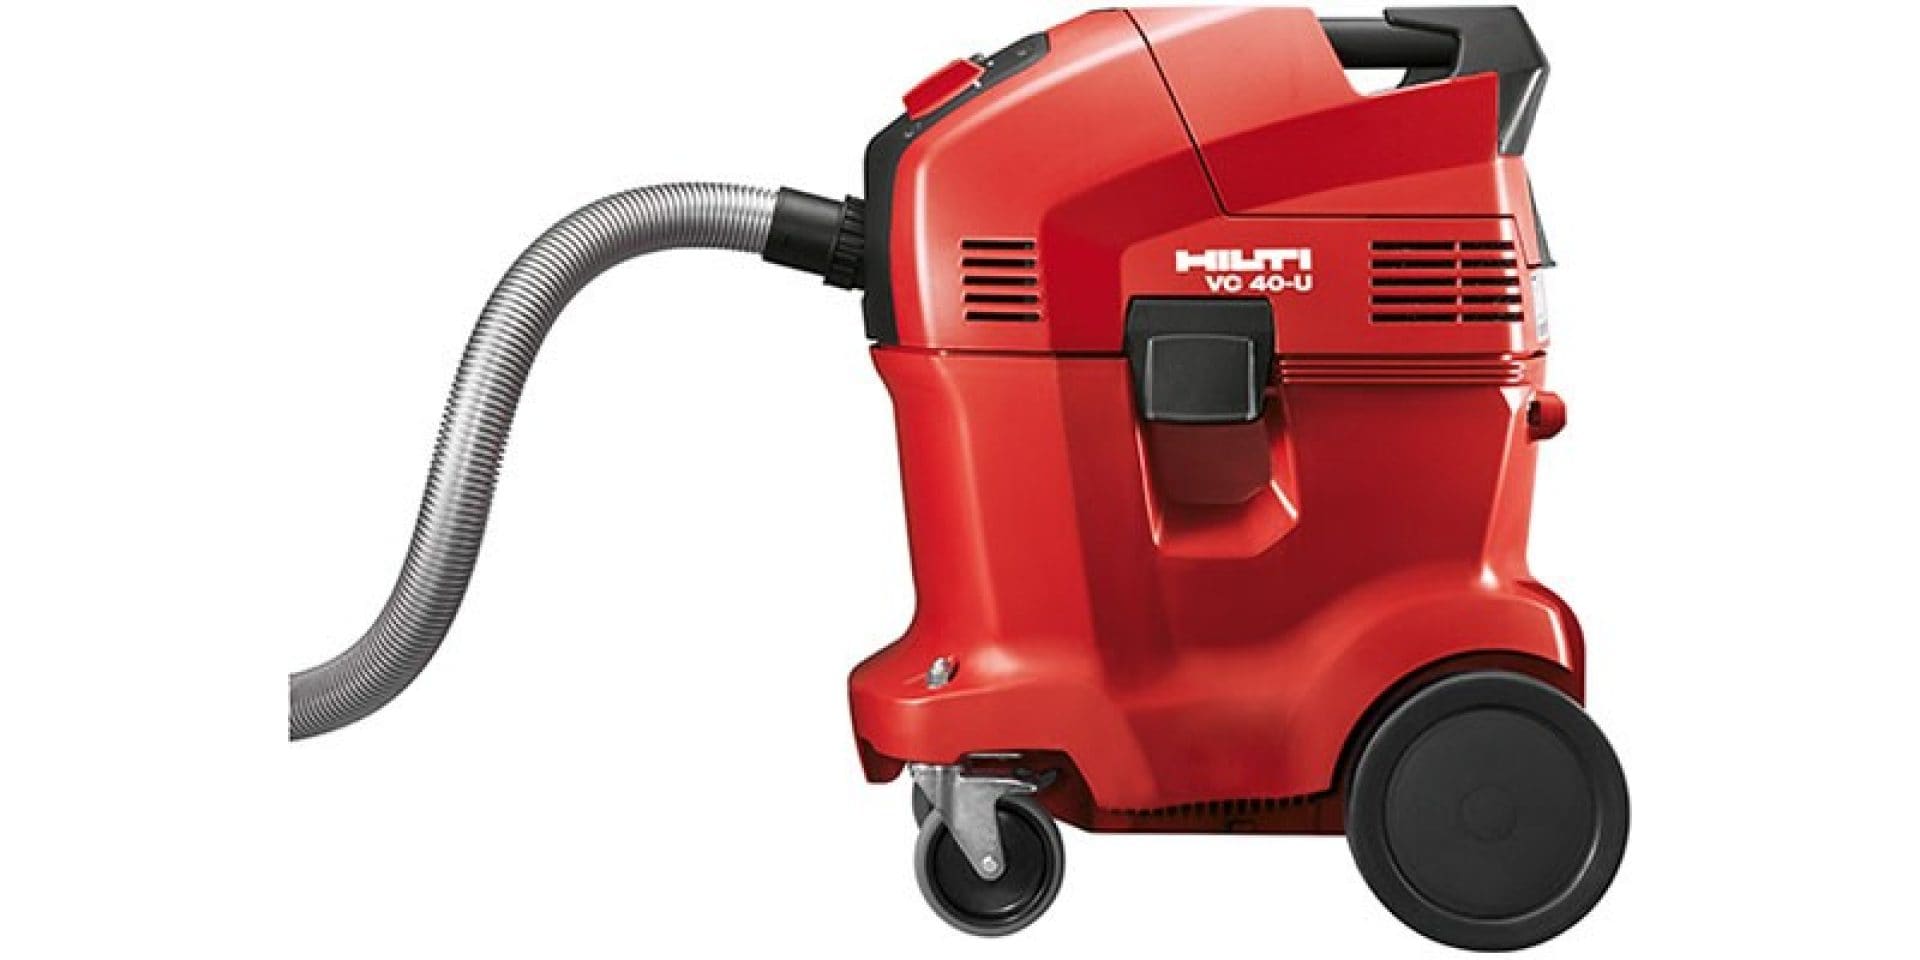 VC range of universal wet and dry vacuum cleaners as part of the Hilti SafeSet system